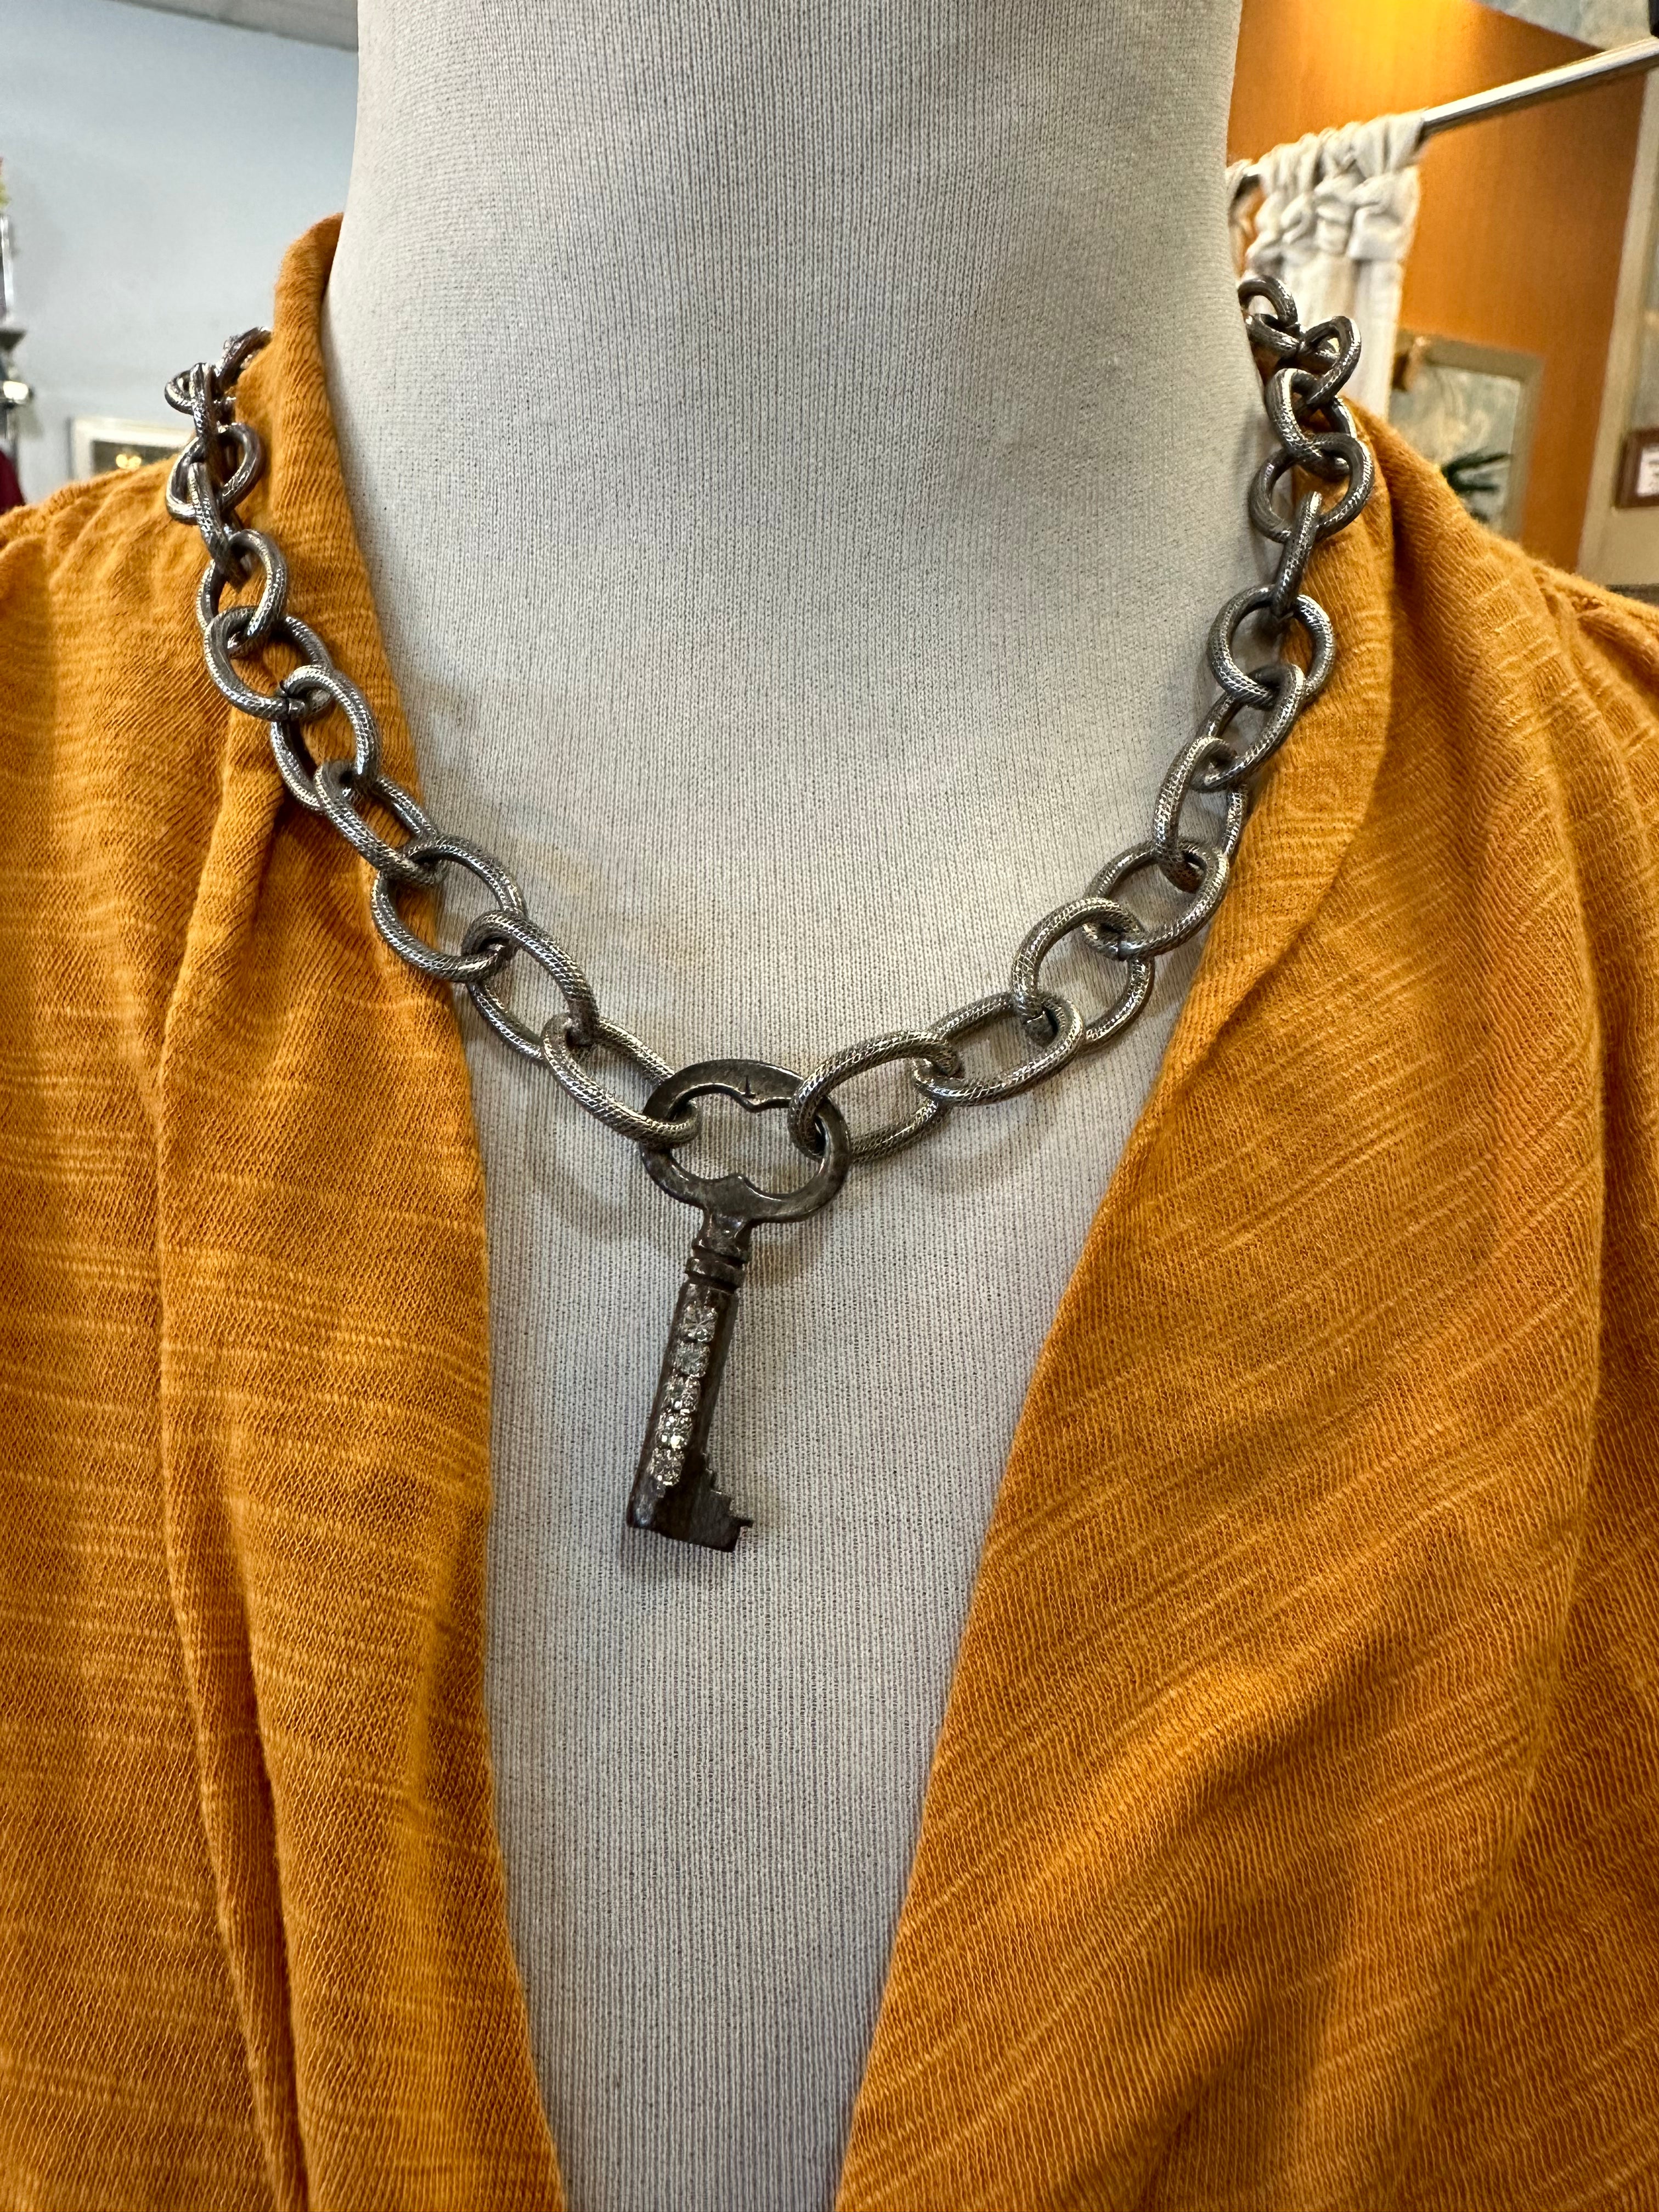 BV Chunky chain with bling key